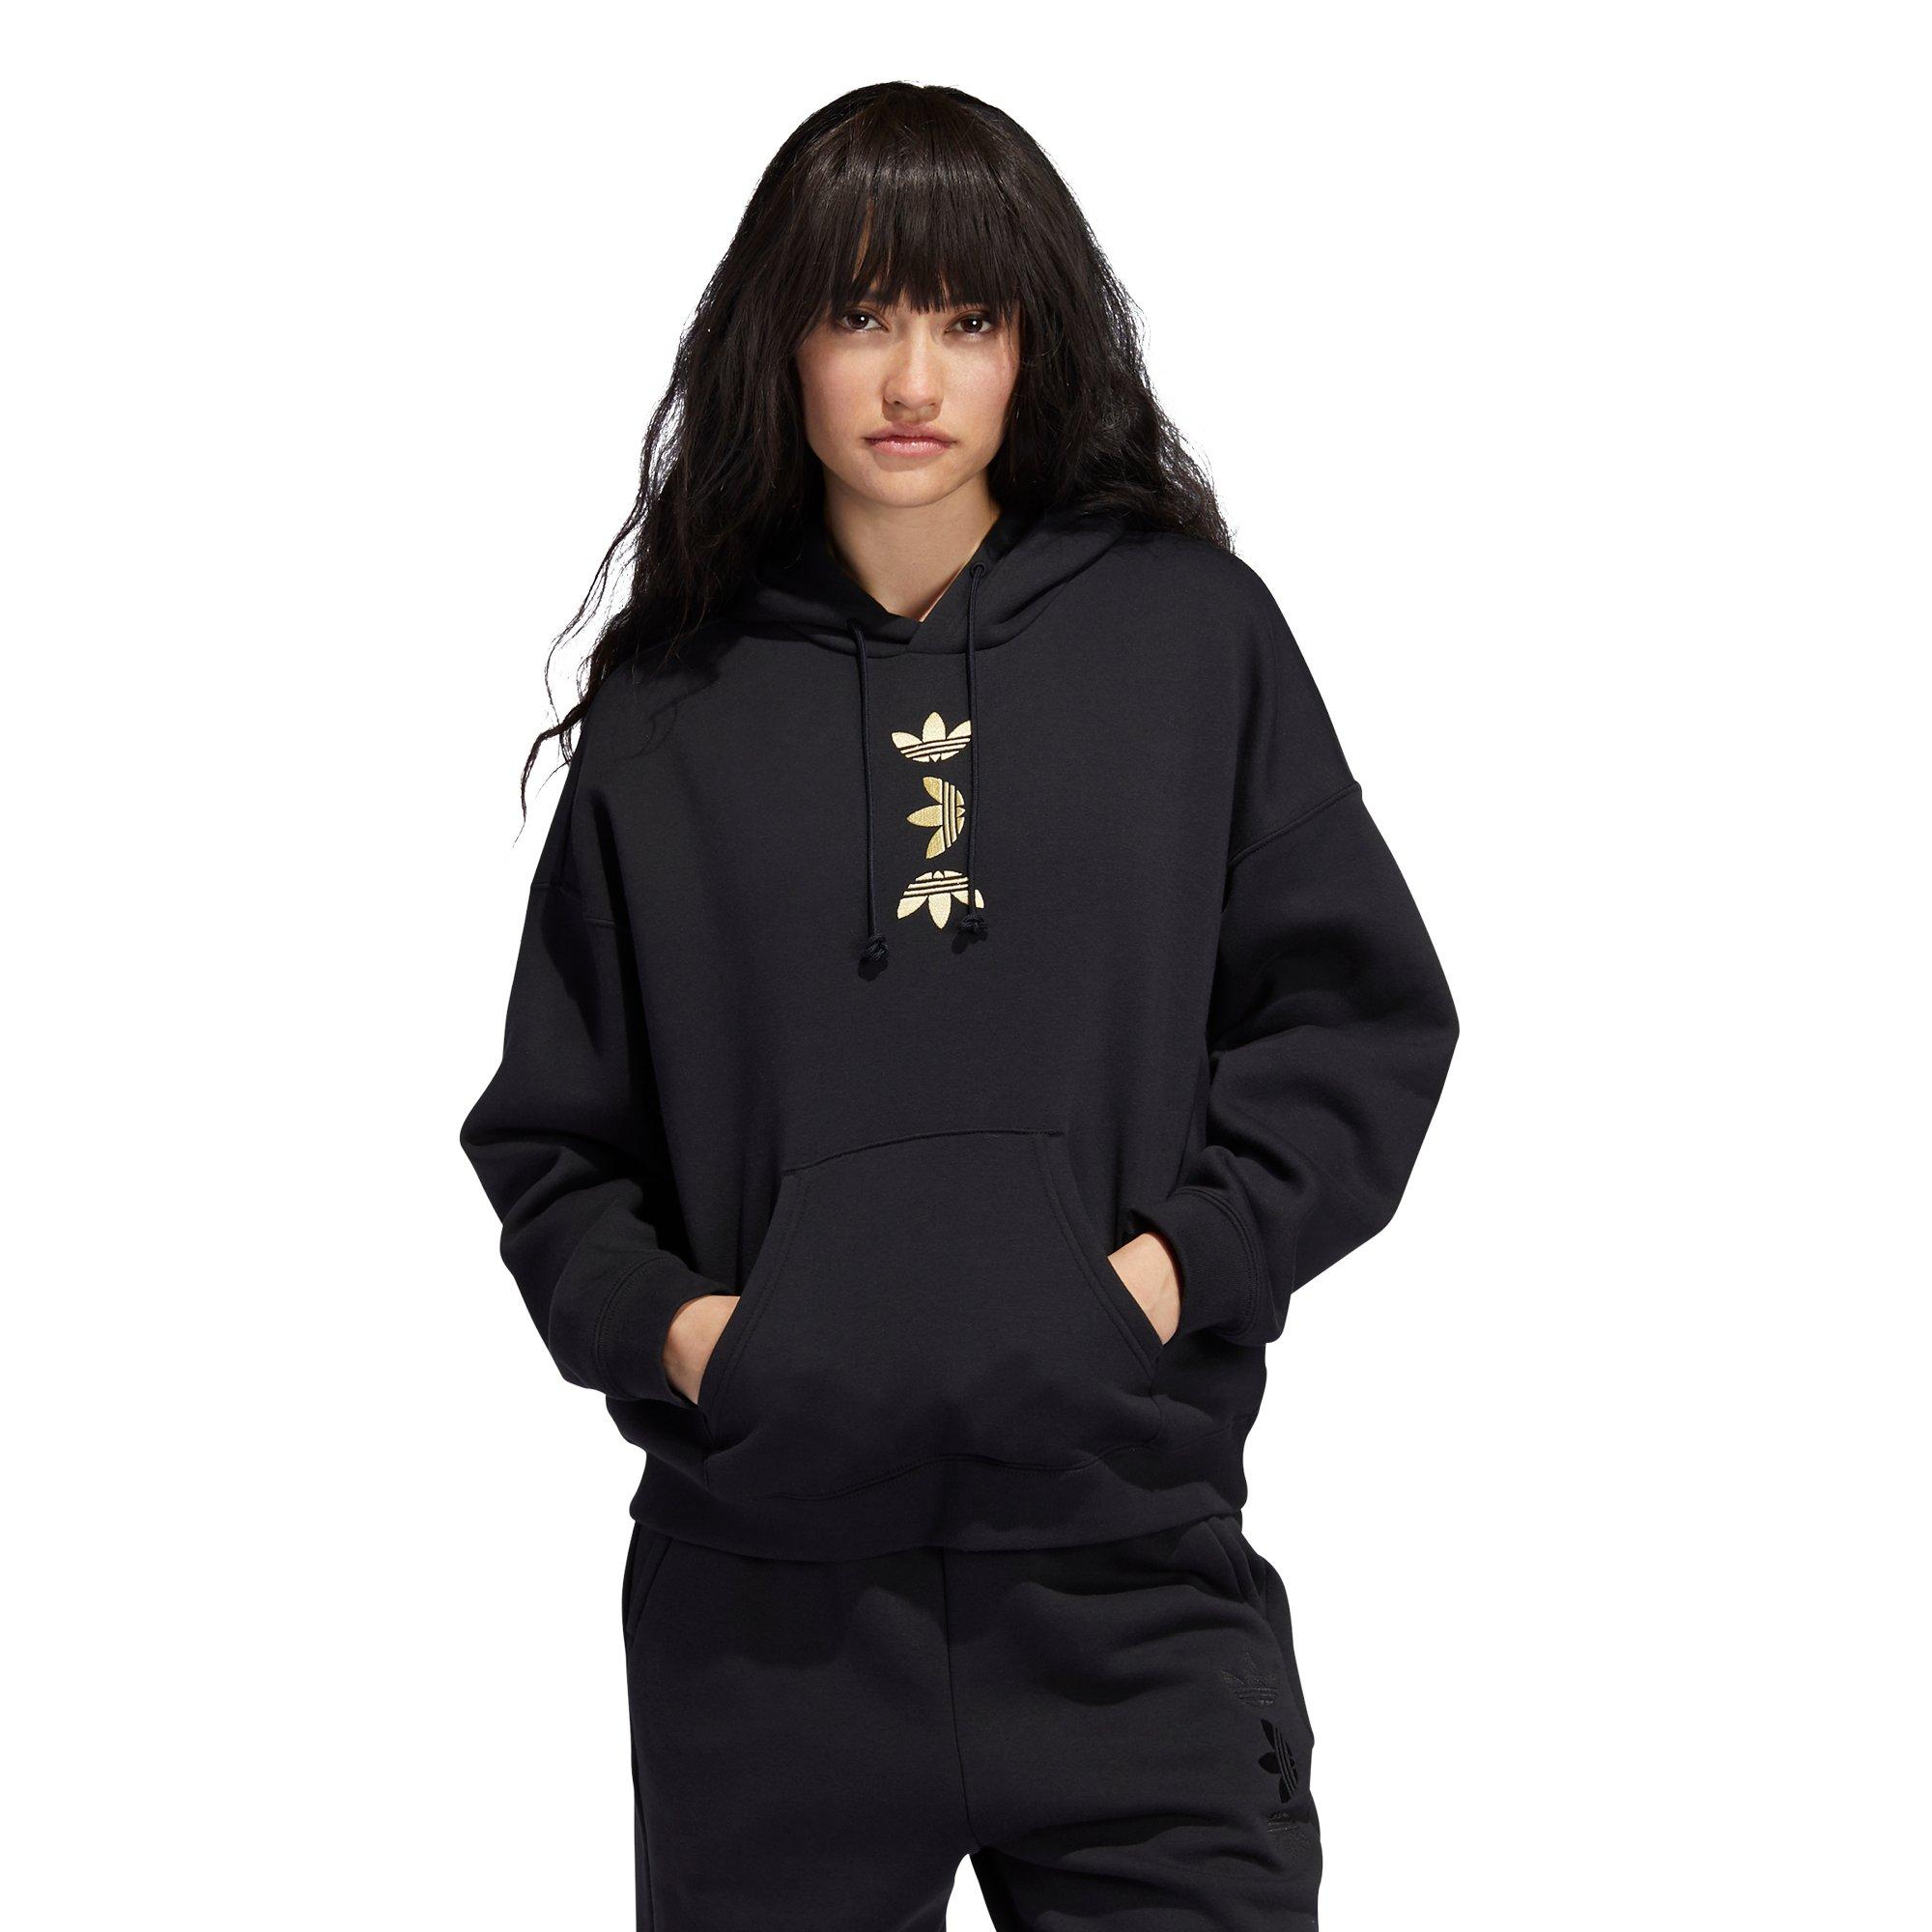 adidas black and gold hoodie women's